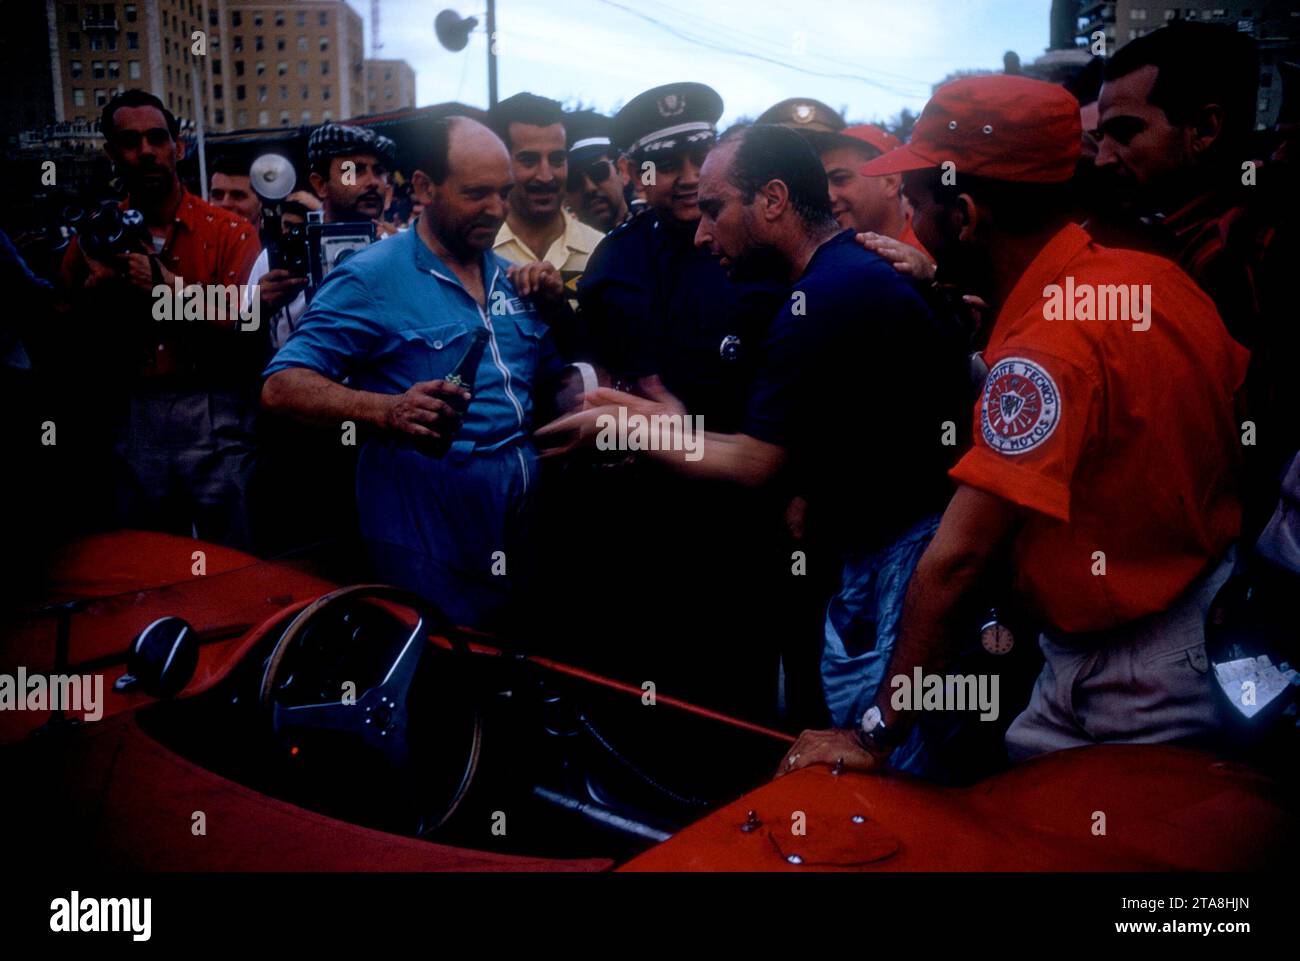 HAVANA, CUBA - FEBRUARY 24:  Juan Manuel Fangio (1911-1995) driver of the Maserati 300S stands next to his car after the 1957 Cuban Grand Prix on February 24, 1957 in Havana, Cuba.  Fangio won the race.  (Photo by Hy Peskin) *** Local Caption *** Juan Manuel Fangio Stock Photo